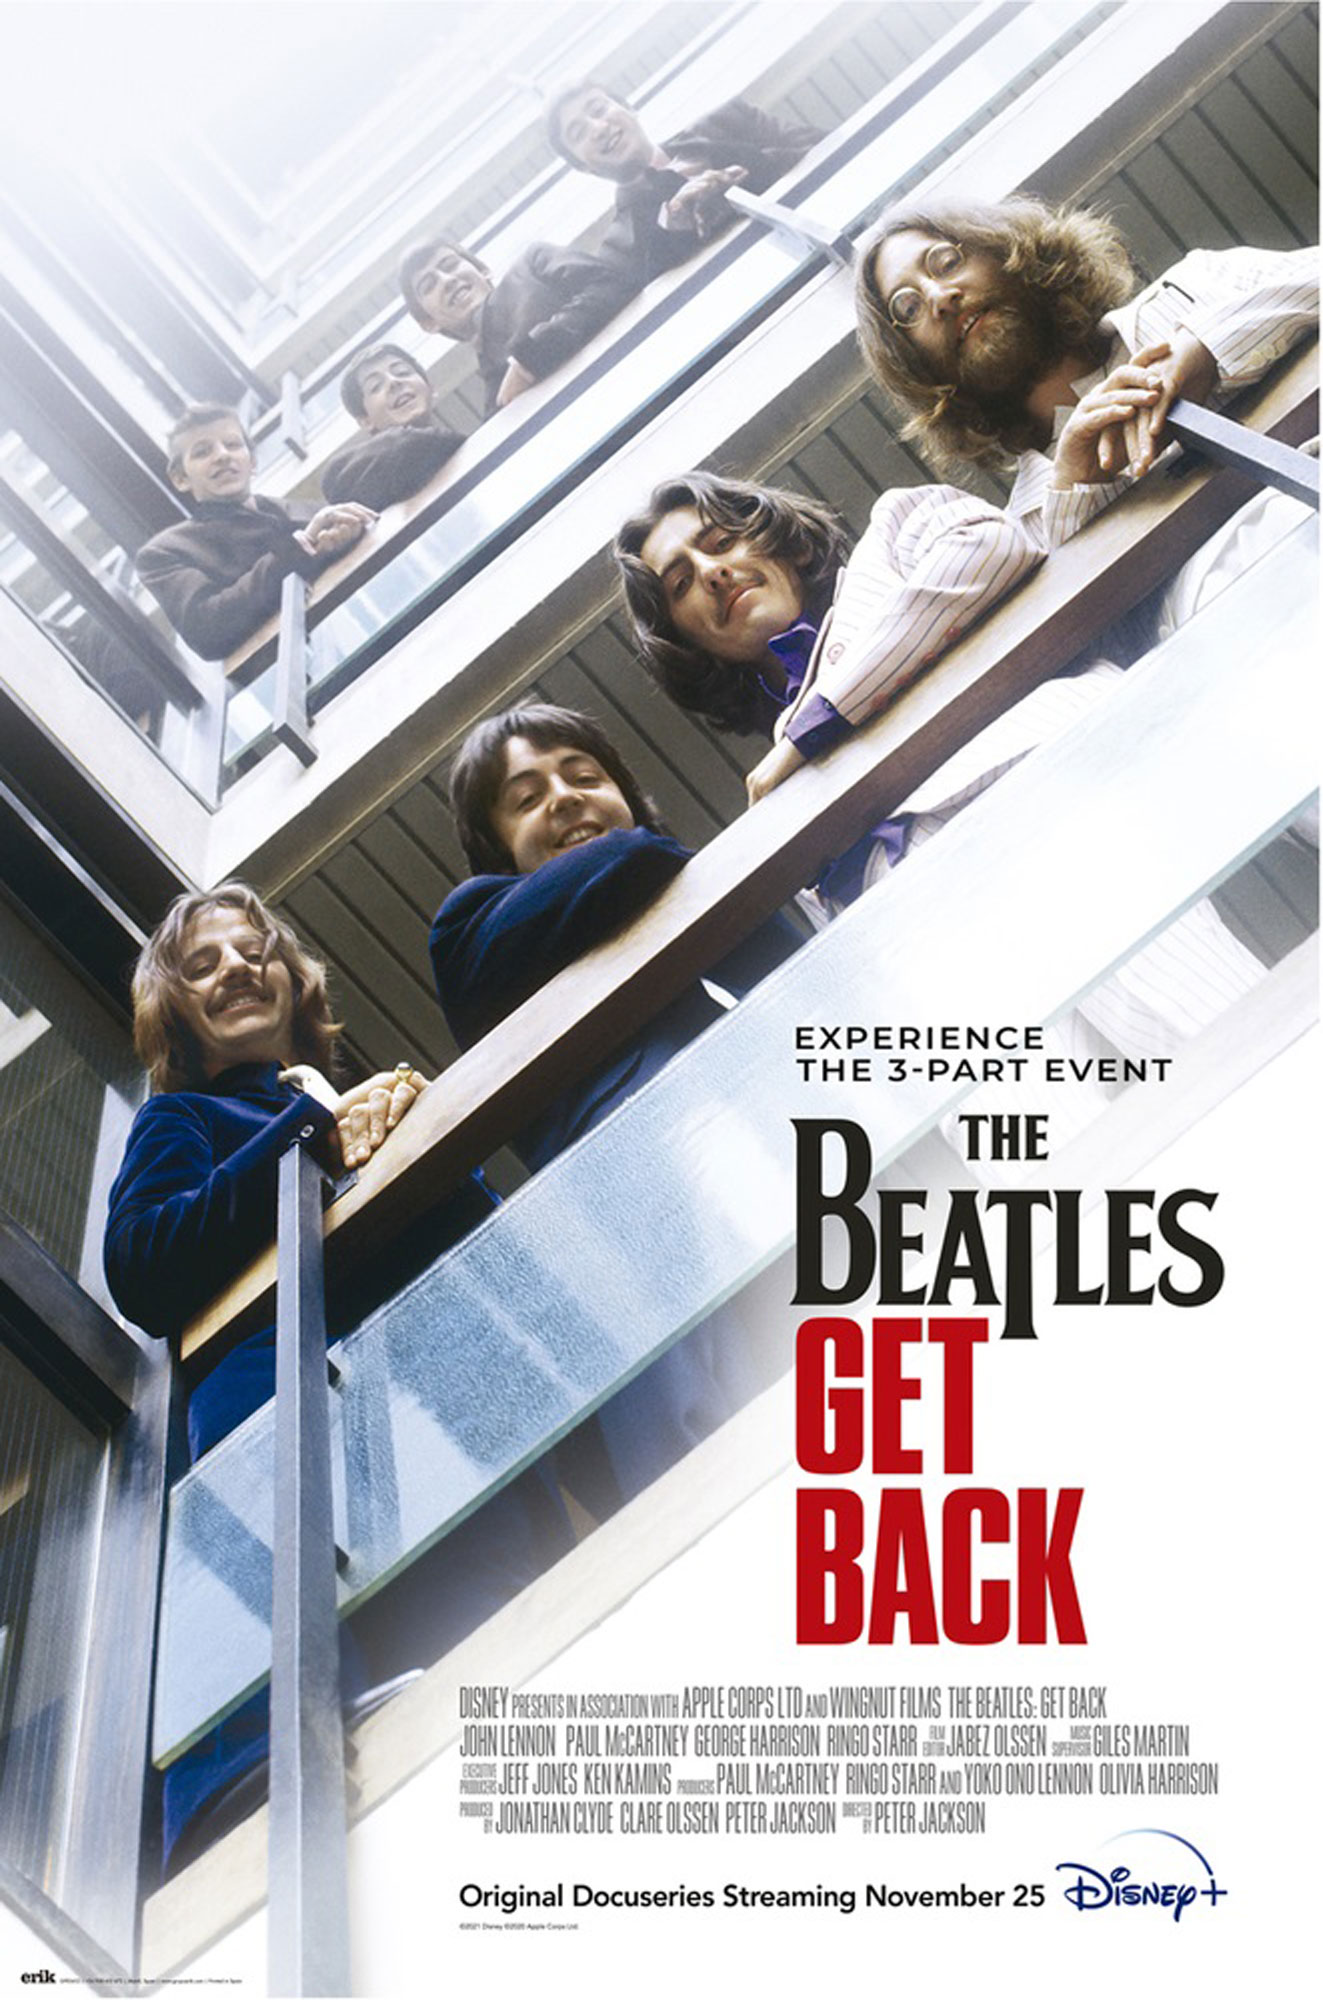 The Beatles, Back - Get